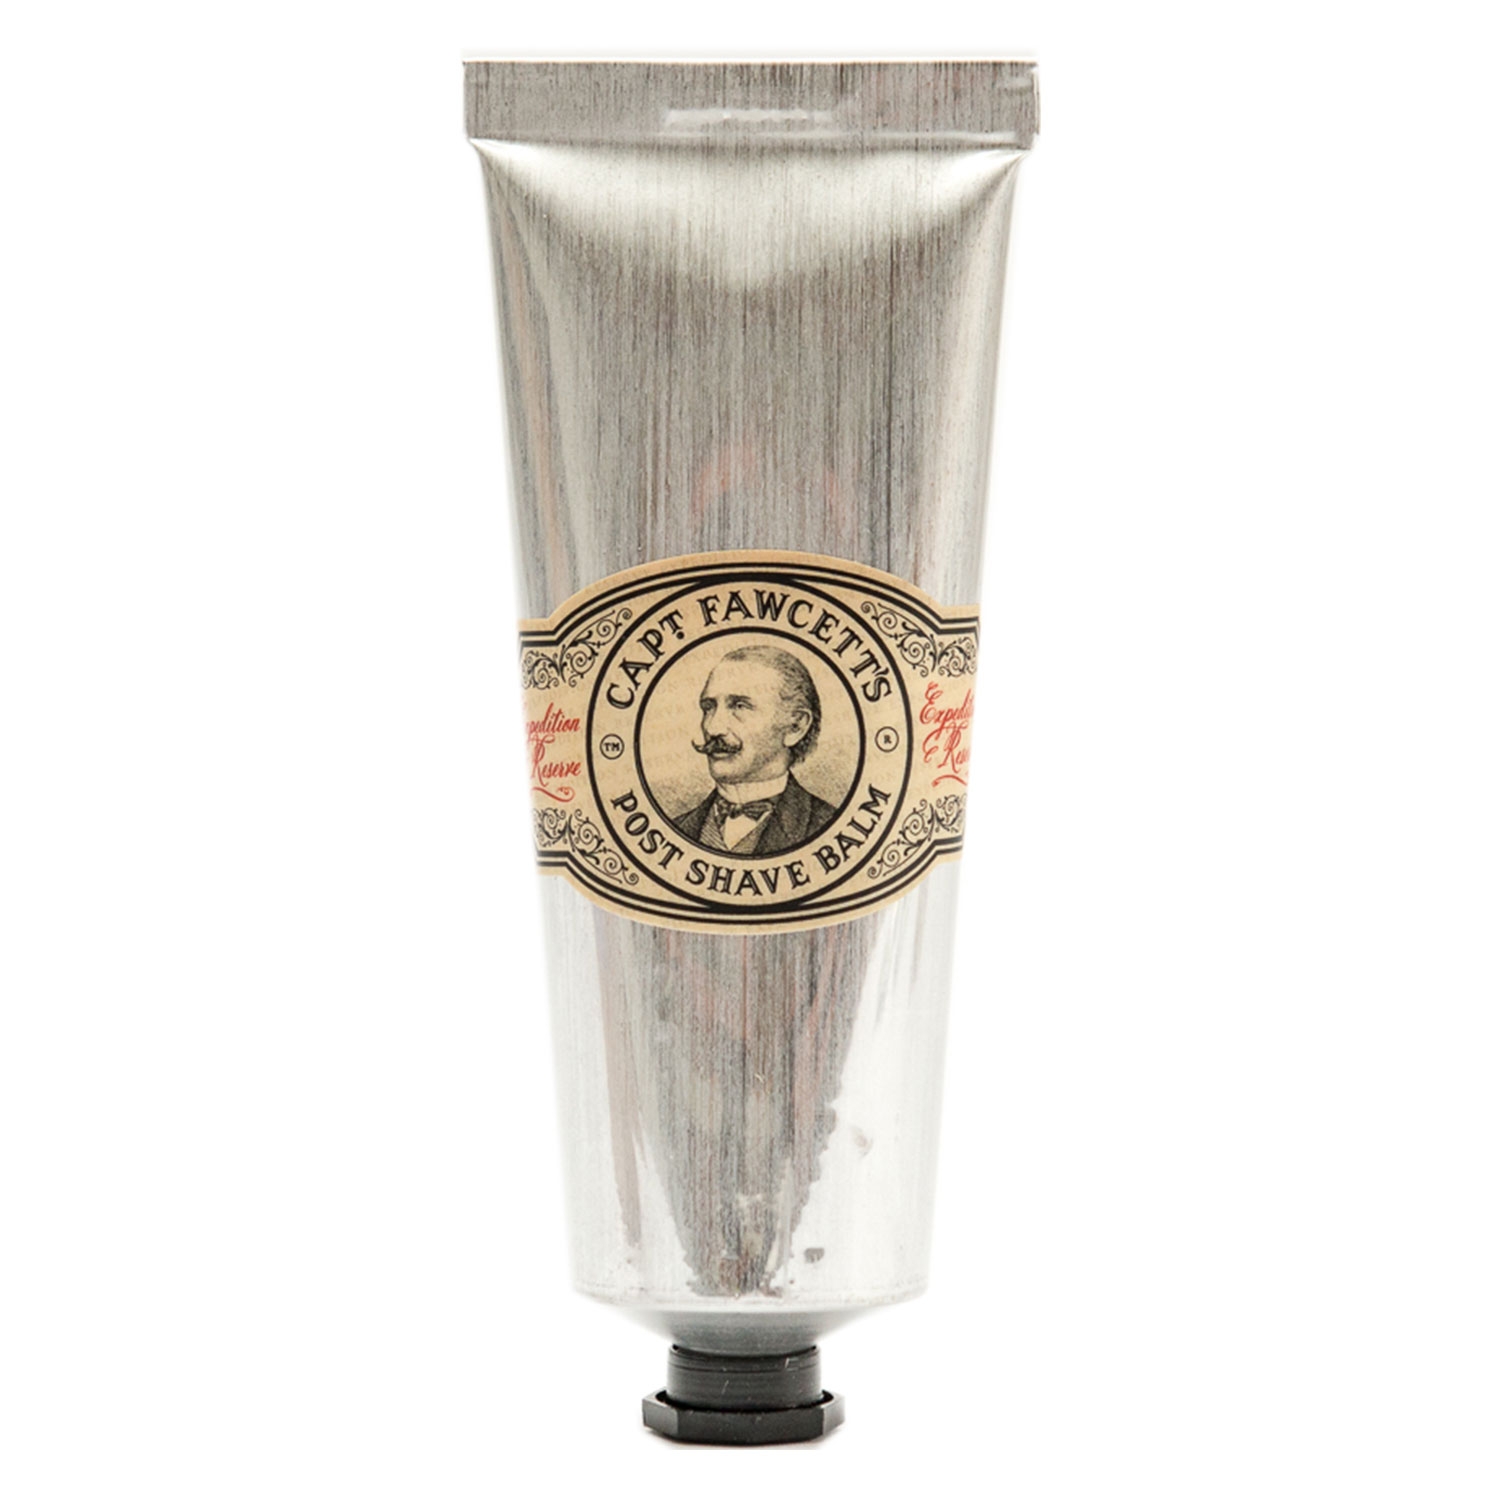 Product image from Capt. Fawcett Care - Post Shave Balm